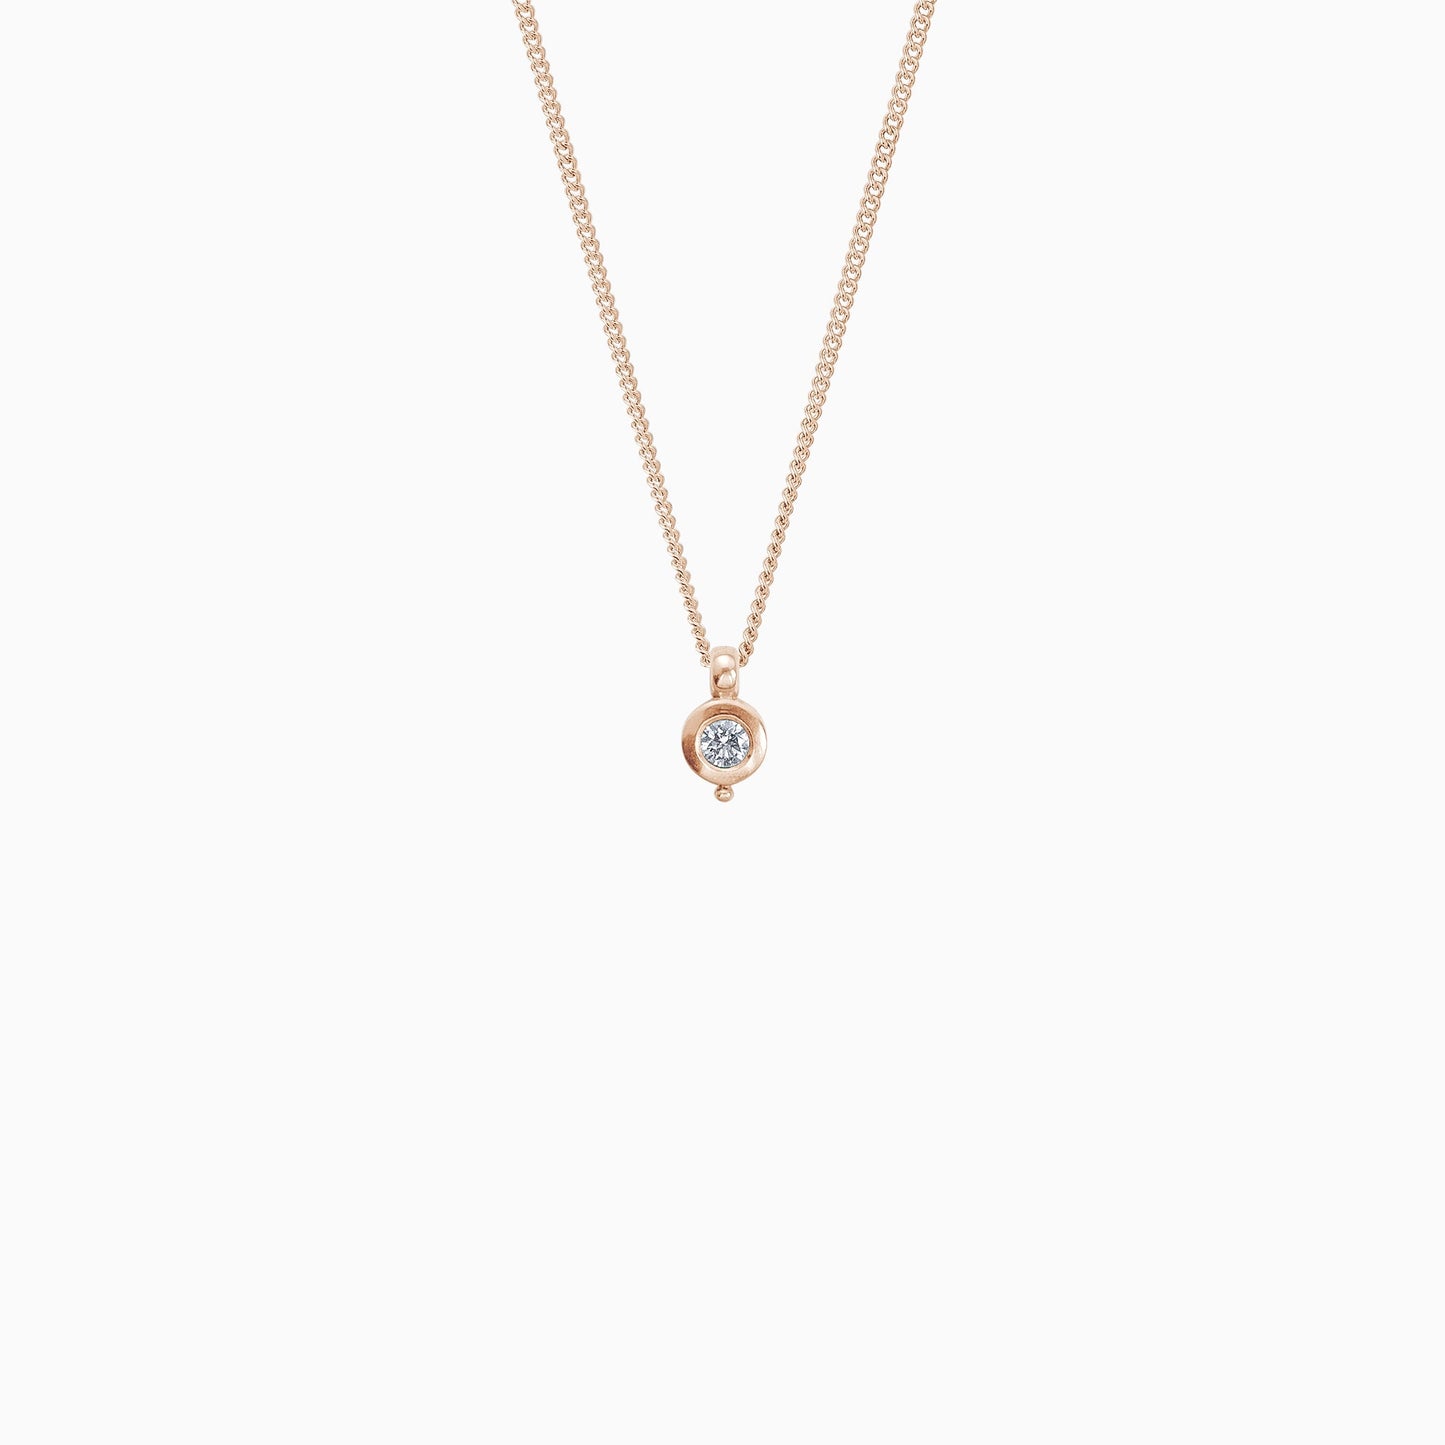 18ct Fairtrade rose gold round pendant 12mm  x 7mm with small round bead attached below on a 45cm fine curb chain. Set with a 0.25ct round diamond.